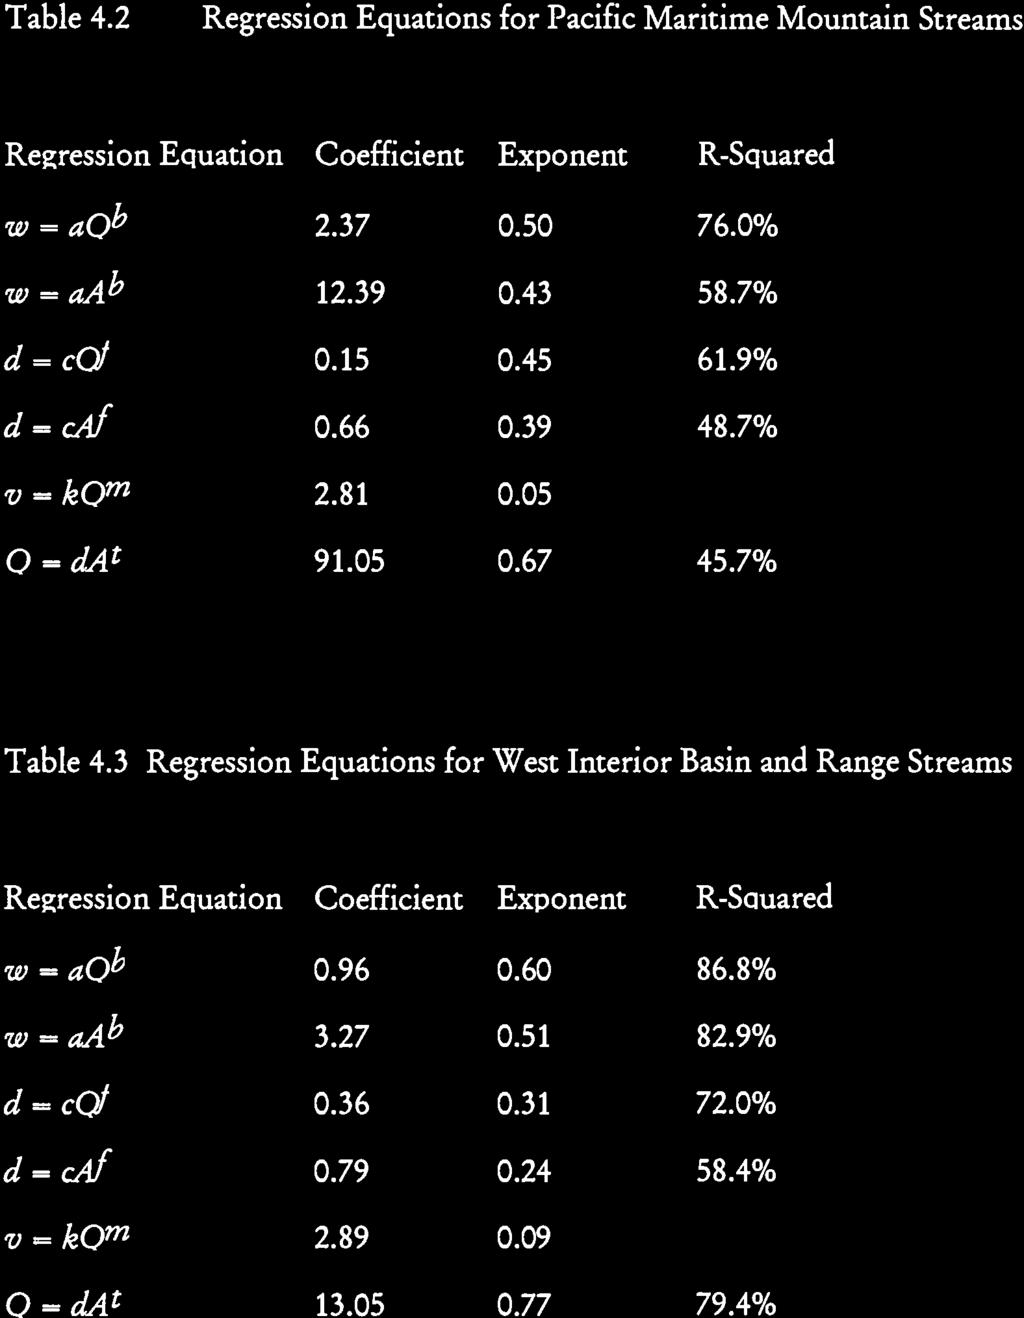 87 Table 4.2 Regression Equations for Pacific Maritime Mountain Streams Regression Equation Coefficient Exponent R-Squared w = aqb w = aab - d = cof d = caf v = kom Q = dat 2.37 0.50 76.0% 12.39 0.